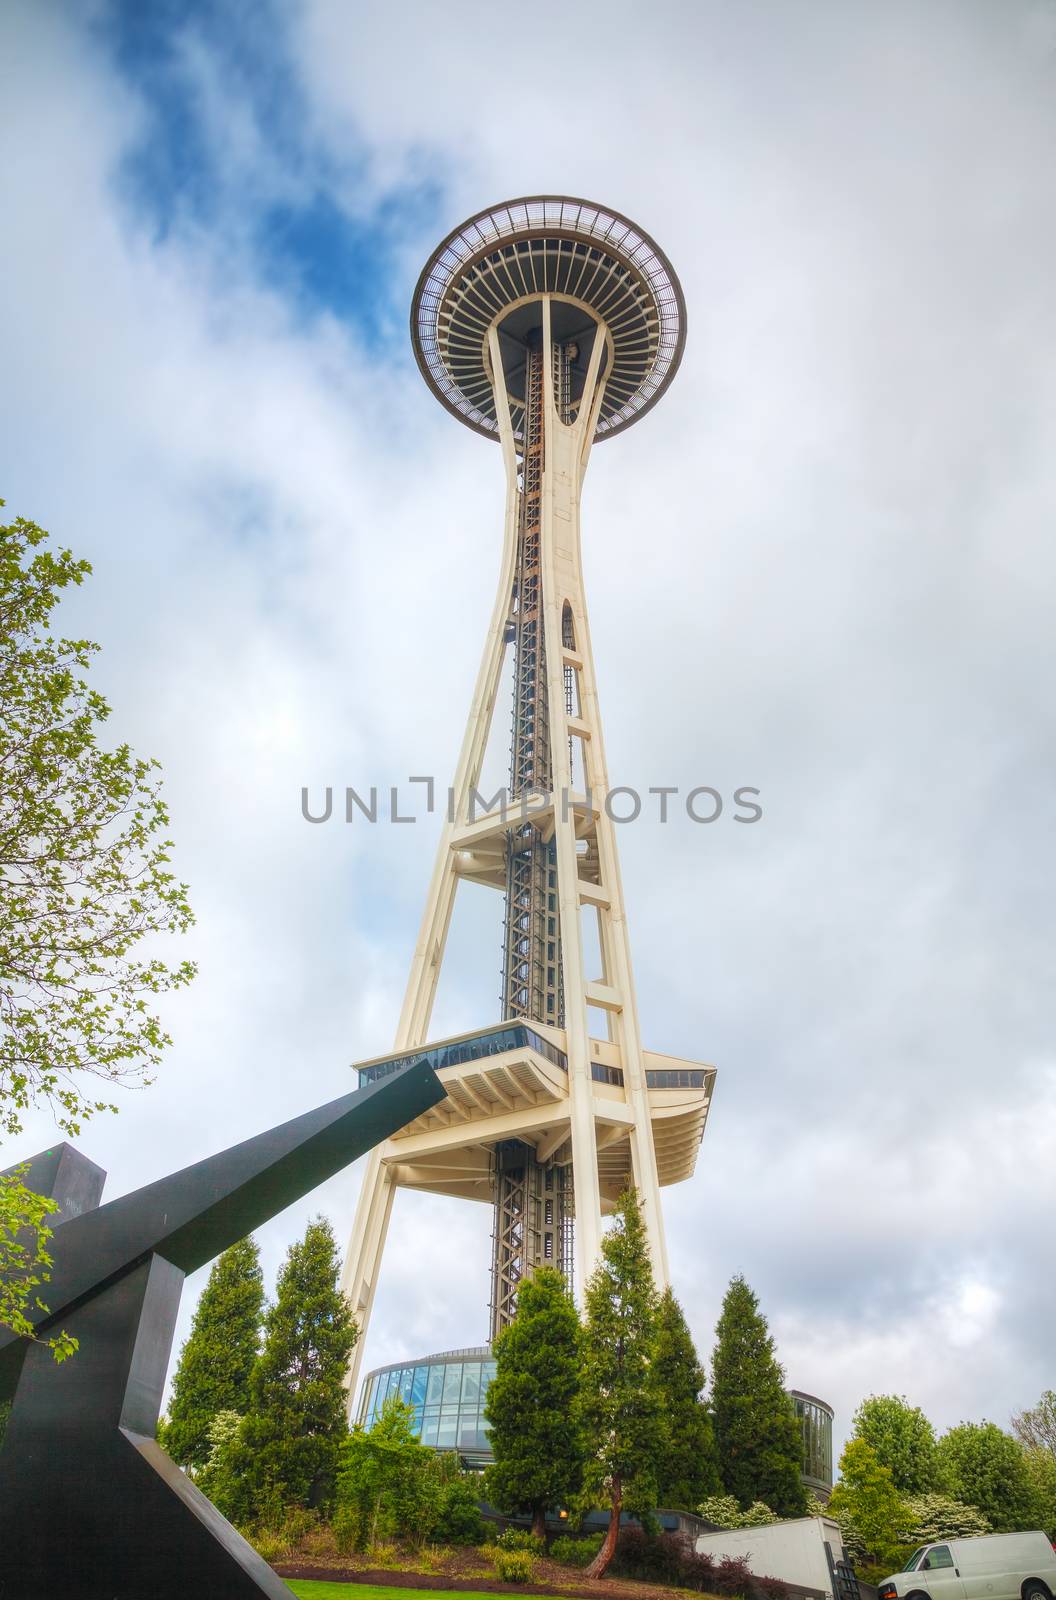 SEATTLE - MAY 9: Famous Space Needle on May 9, 2014 in Seattle, WA. It's an observation tower in Seattle, Washington, a landmark of the Pacific Northwest, and a symbol of Seattle.